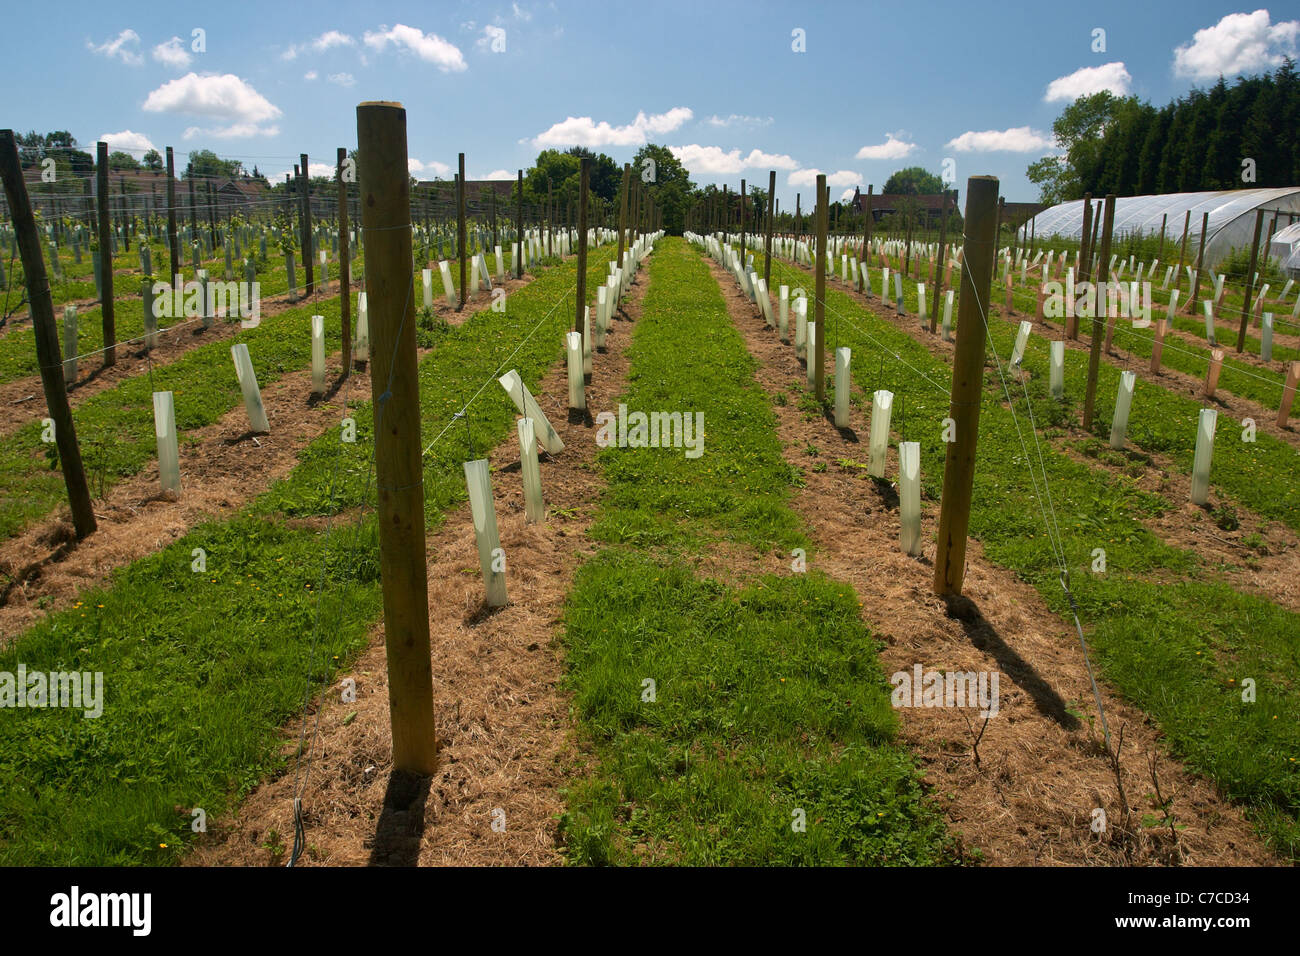 Young grape vines planted at the Chapel Down winery in Tenterden, Kent, England. Stock Photo